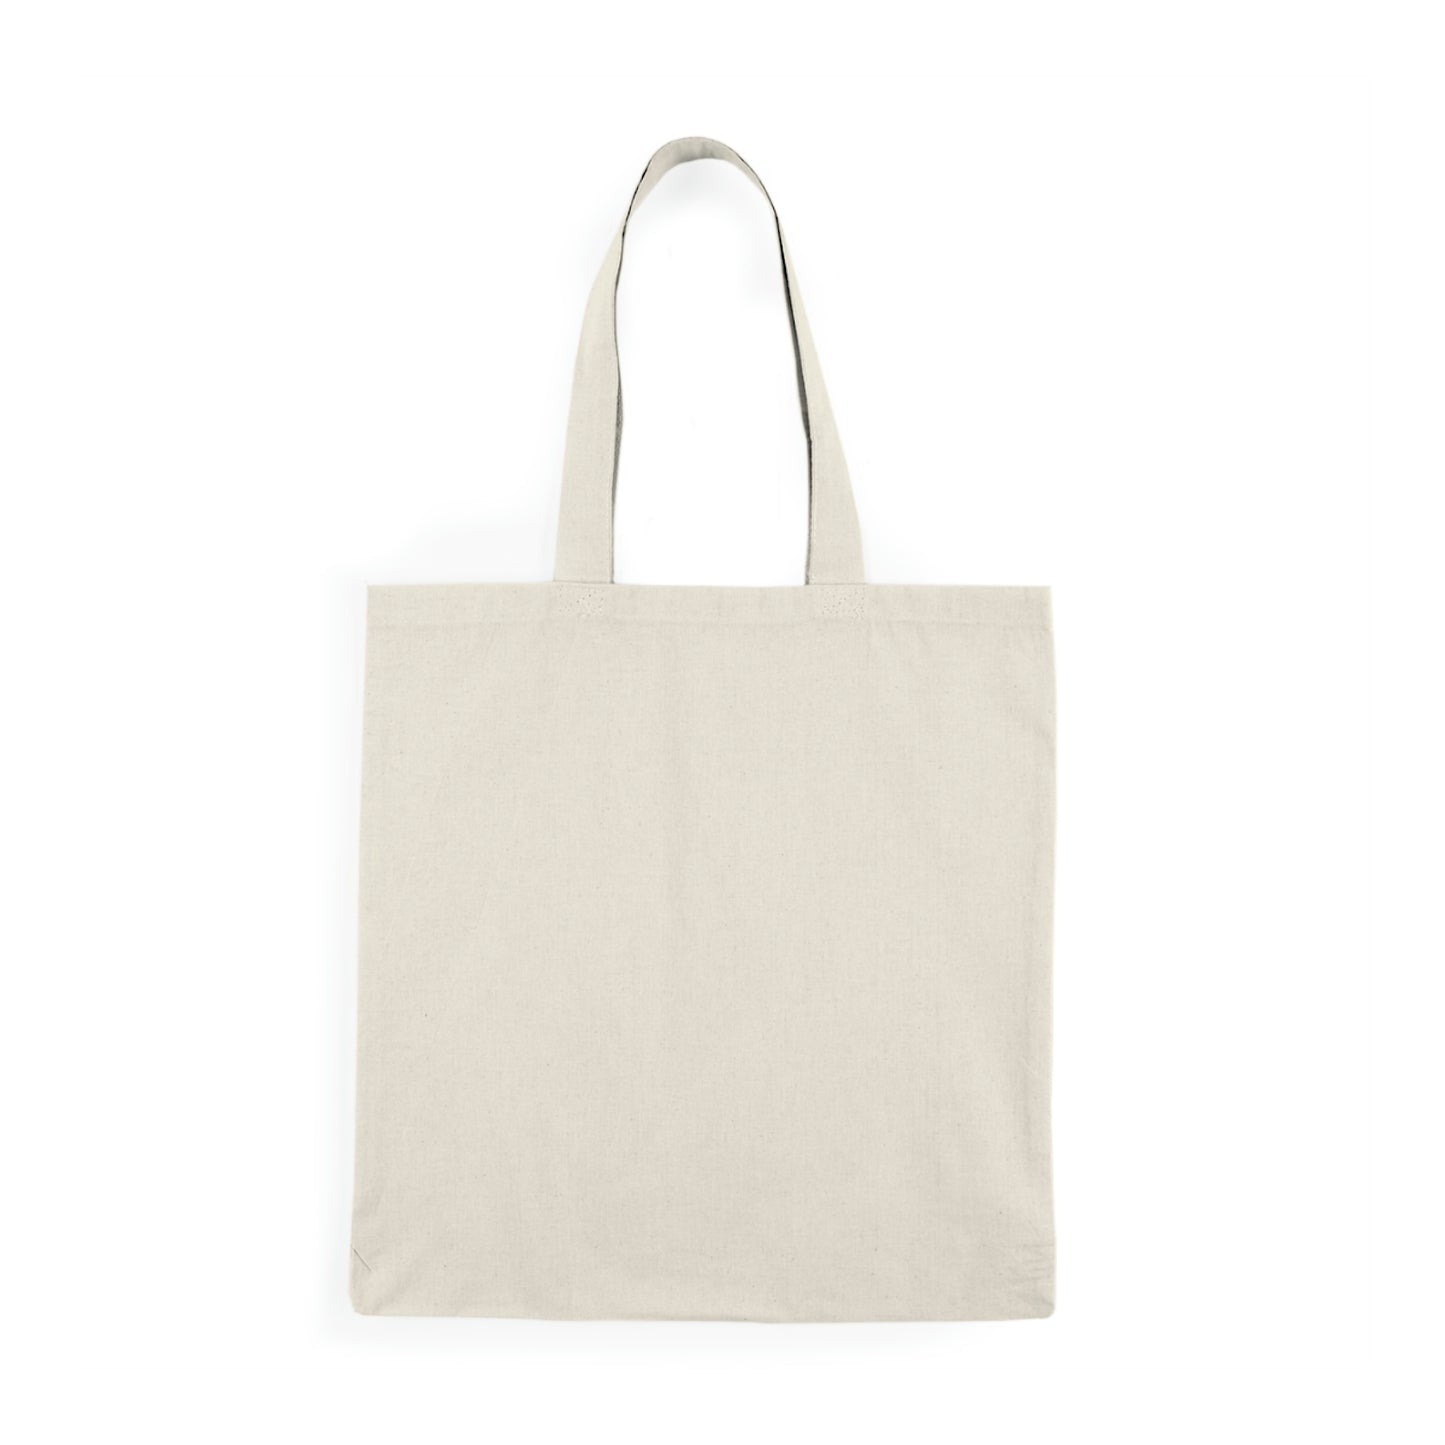 Write It Right - Natural Tote Bag